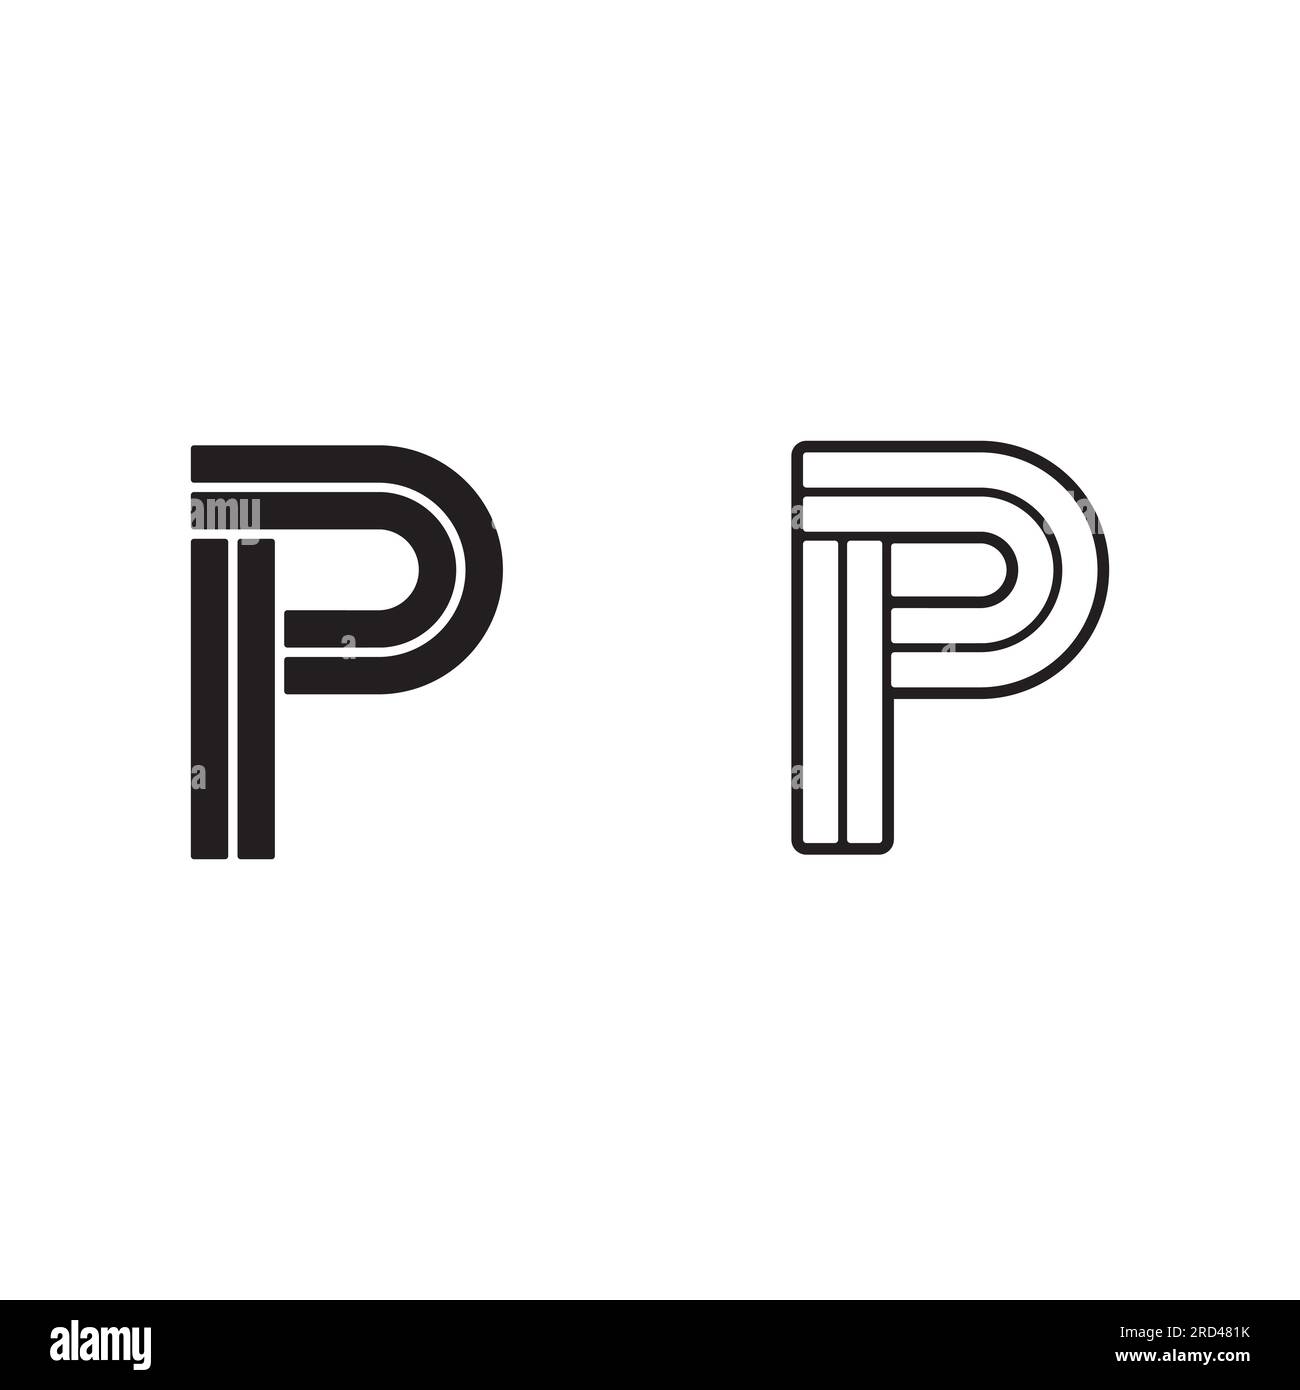 Letter p logo Black and White Stock Photos & Images - Alamy